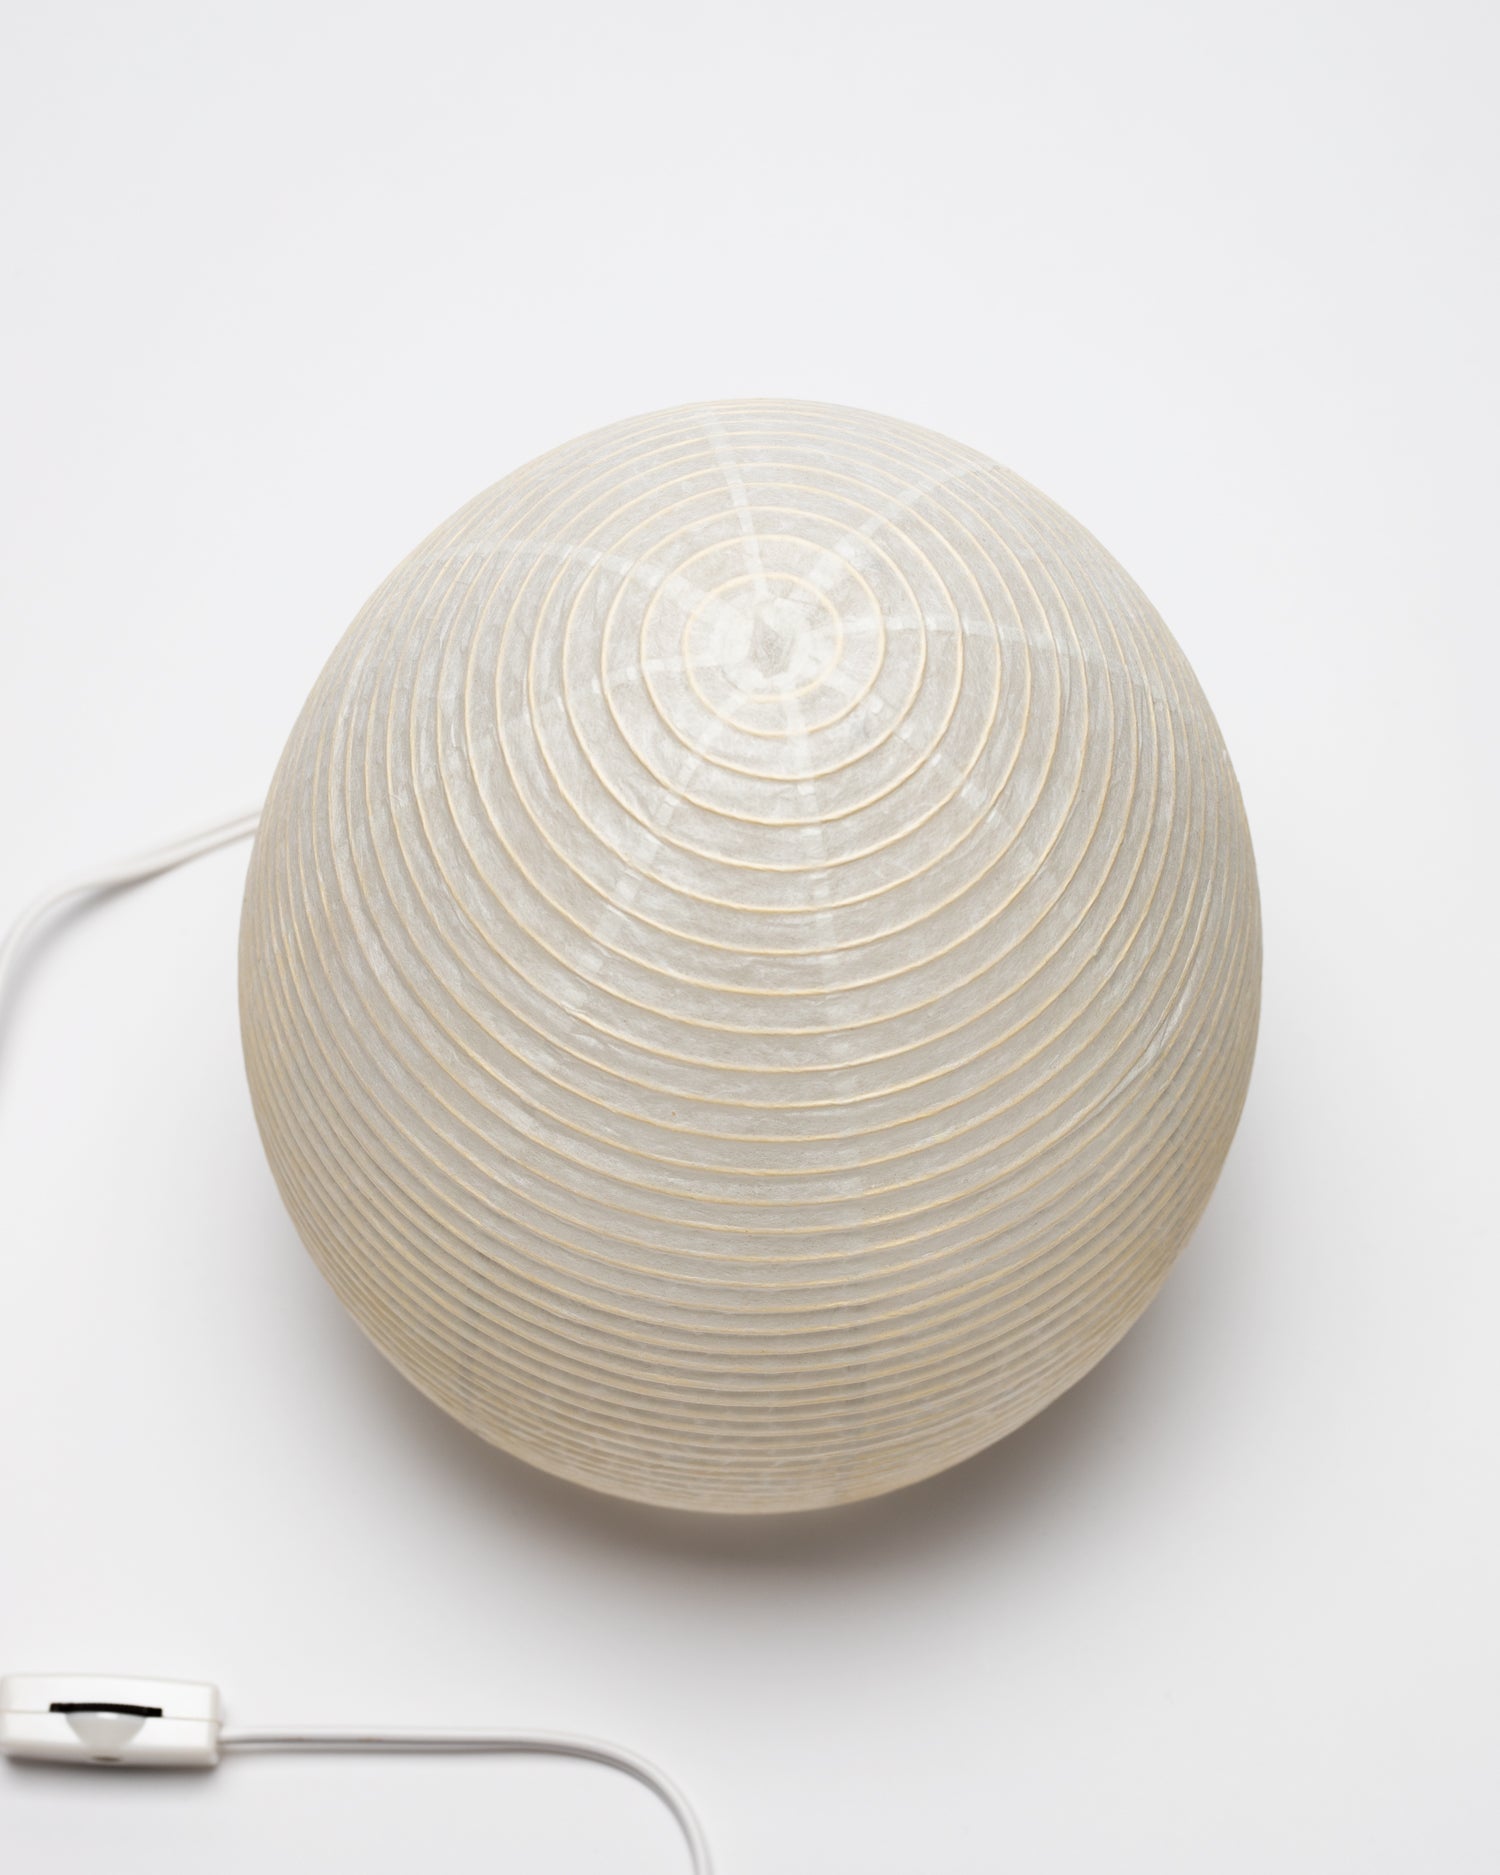 Paper Moon Lamp 01 - The Egg